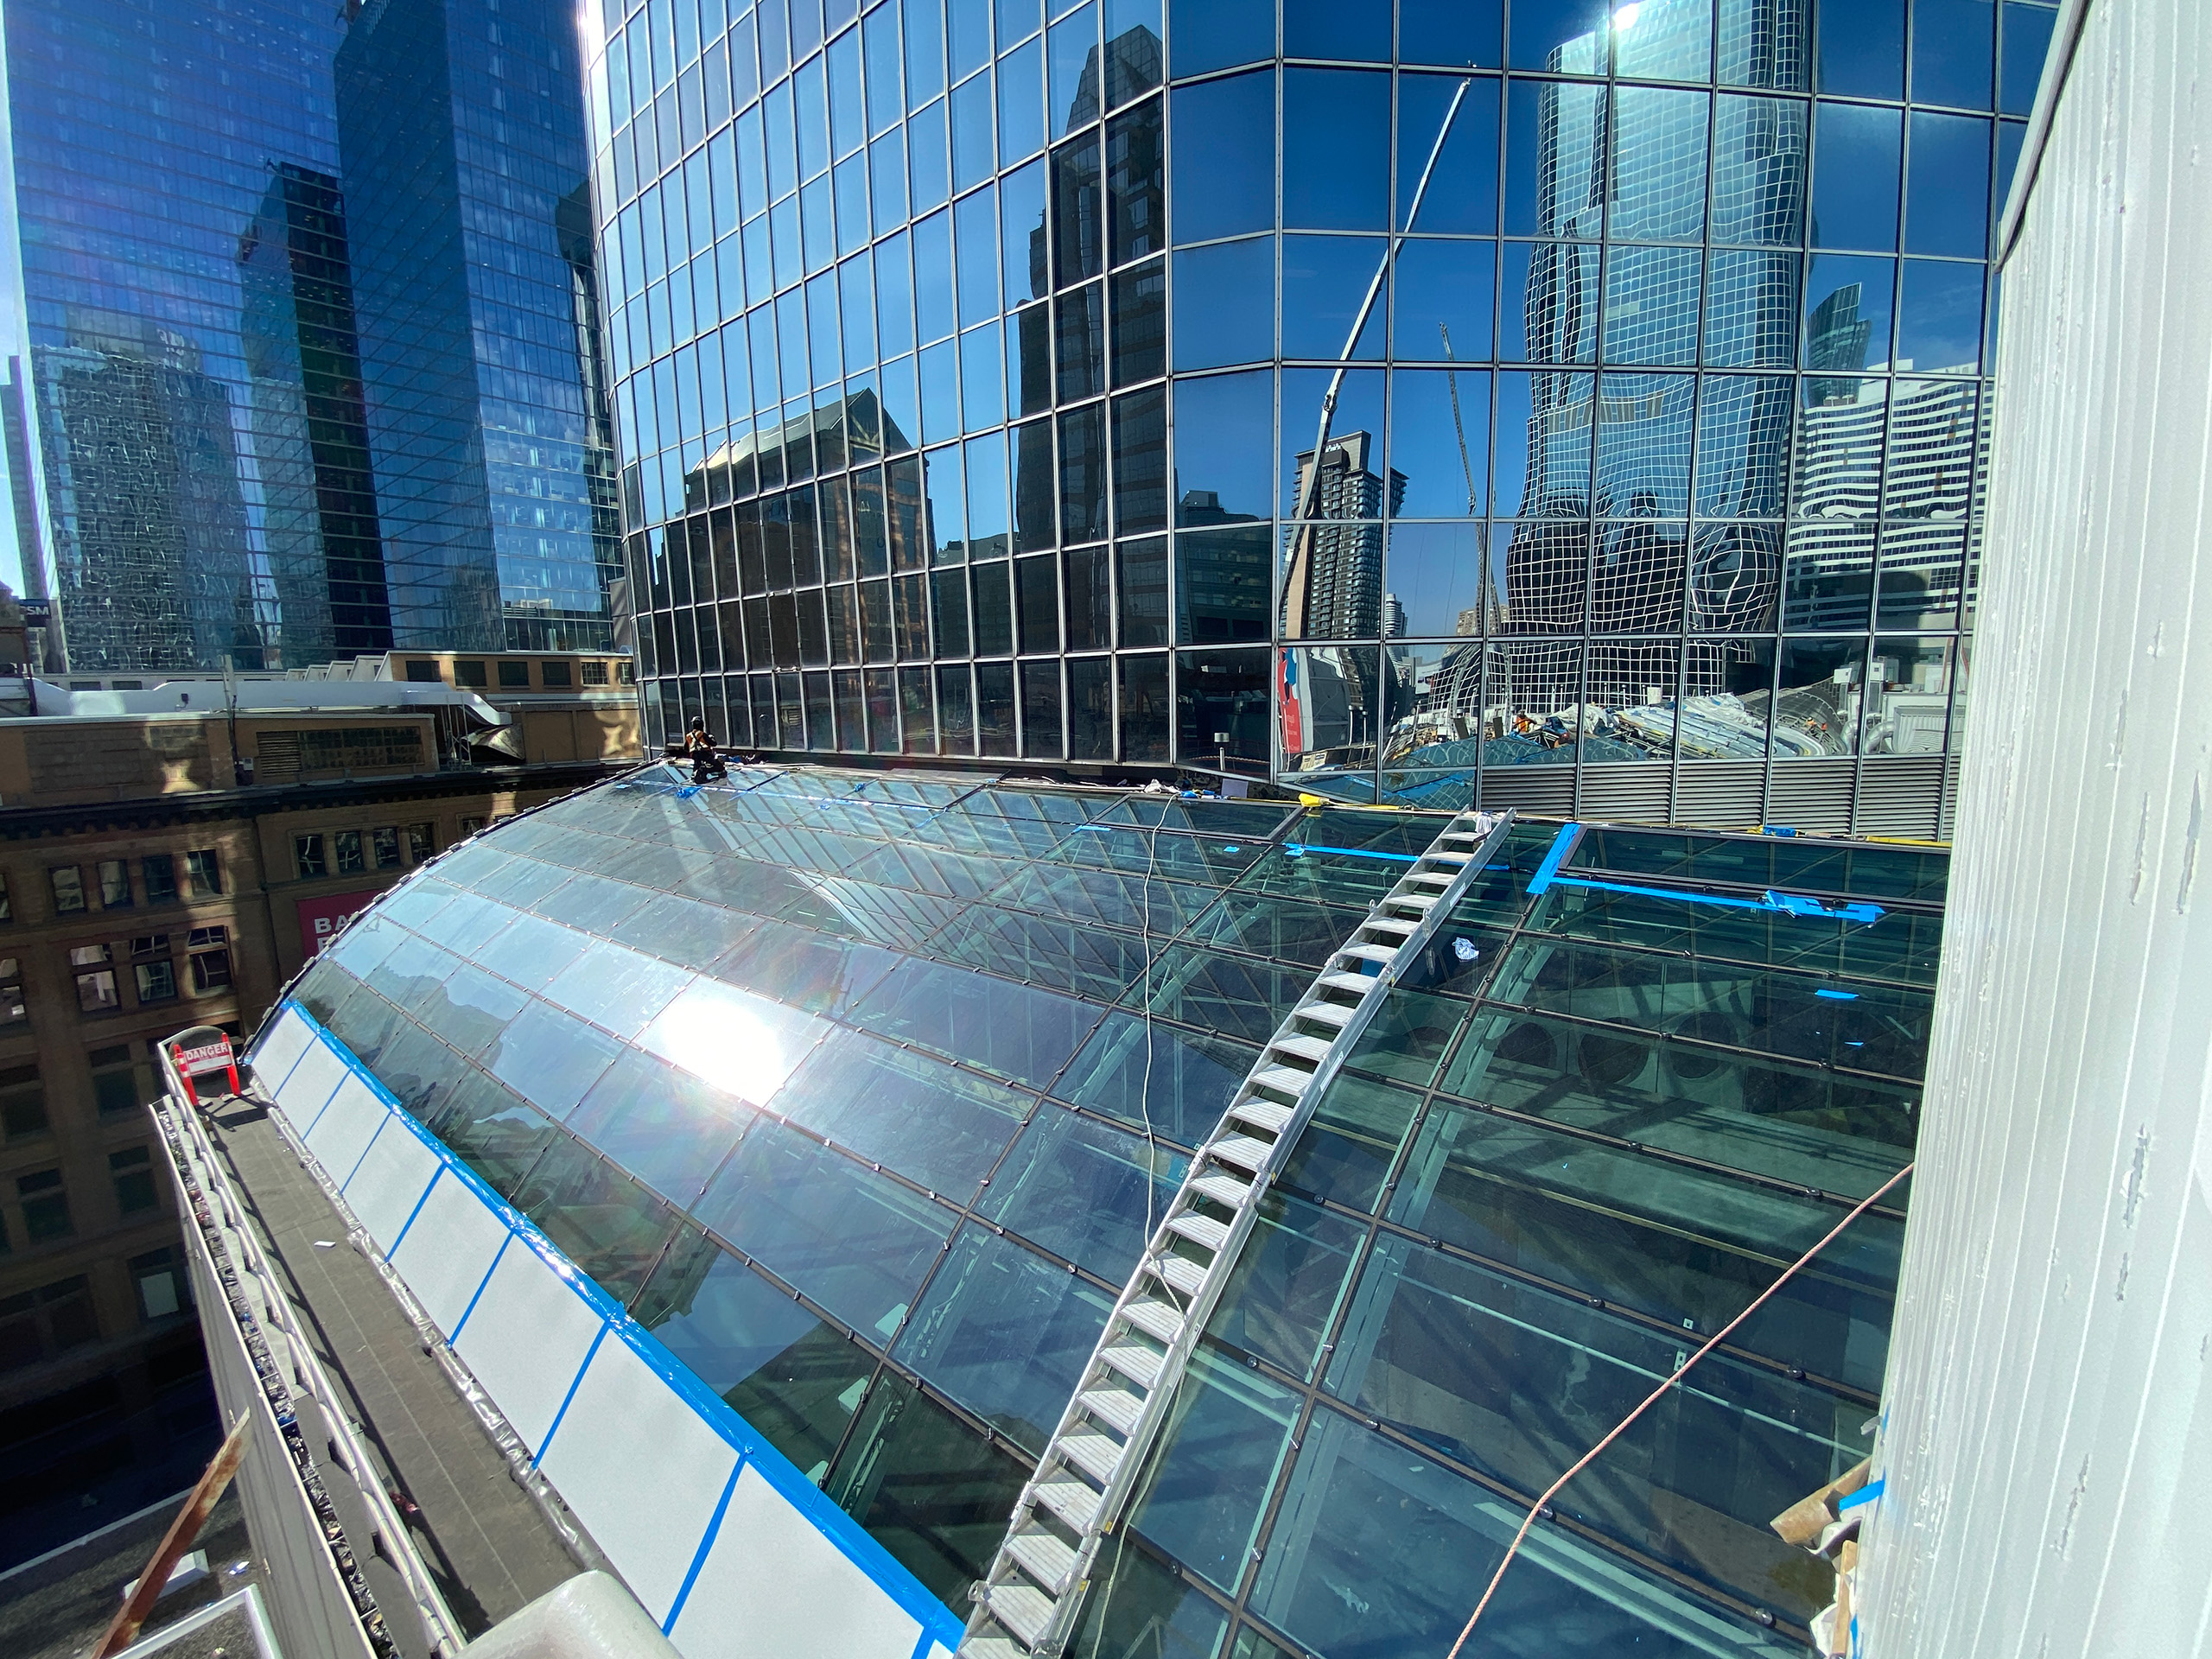 The new glass roof as seen from the exterior.